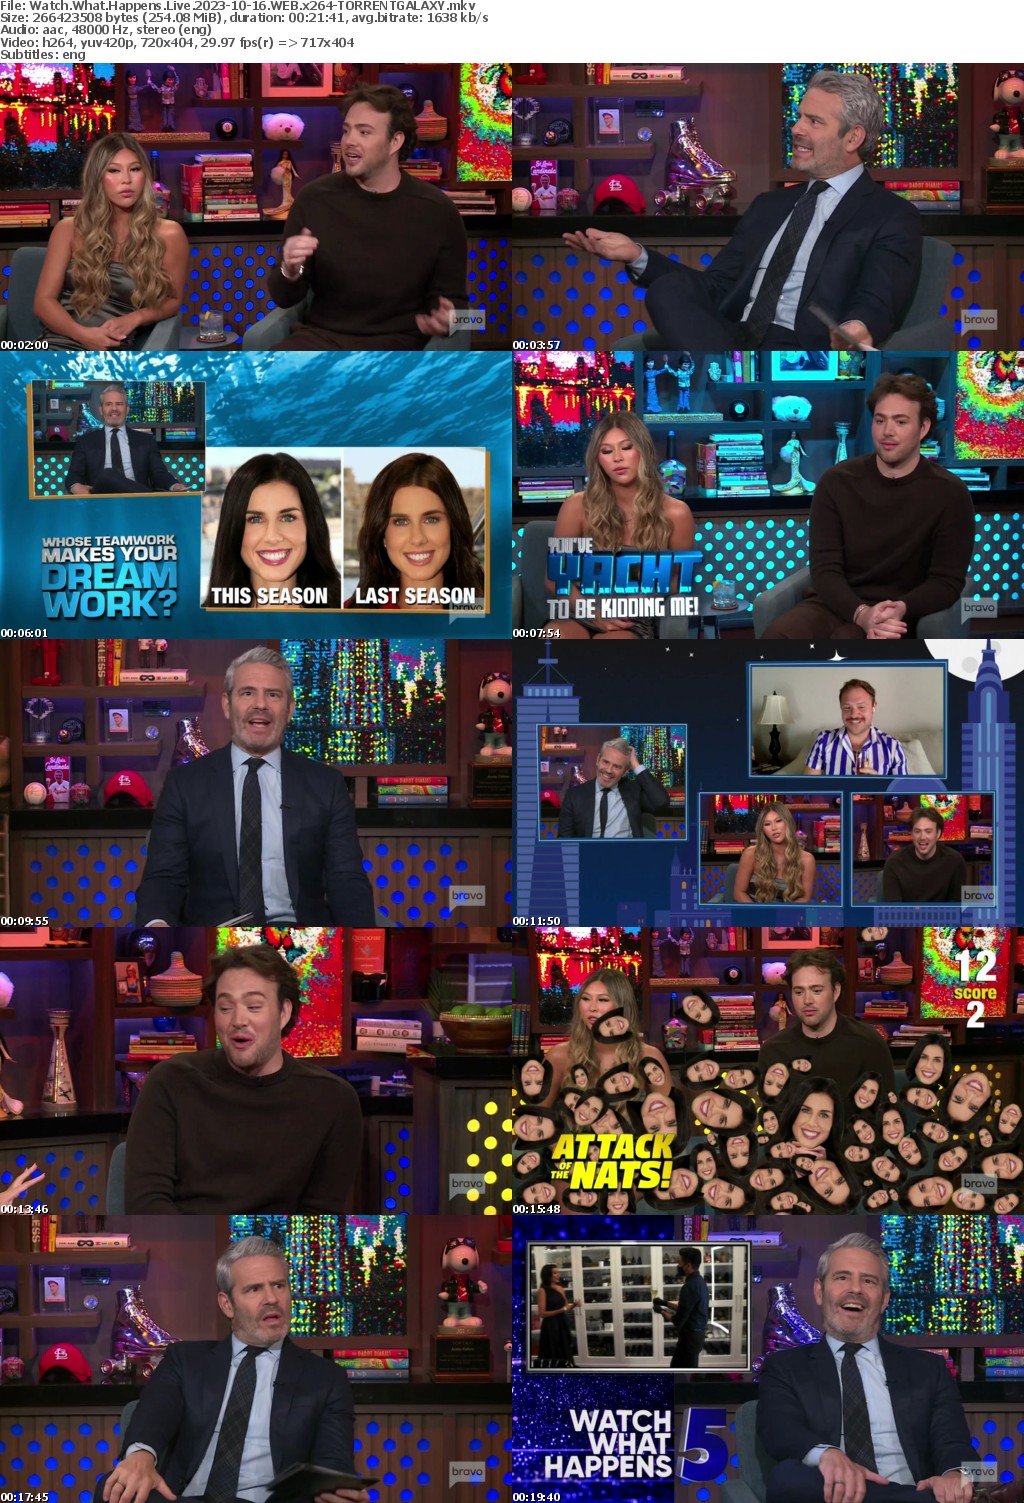 Watch What Happens Live 2023-10-16 WEB x264-GALAXY